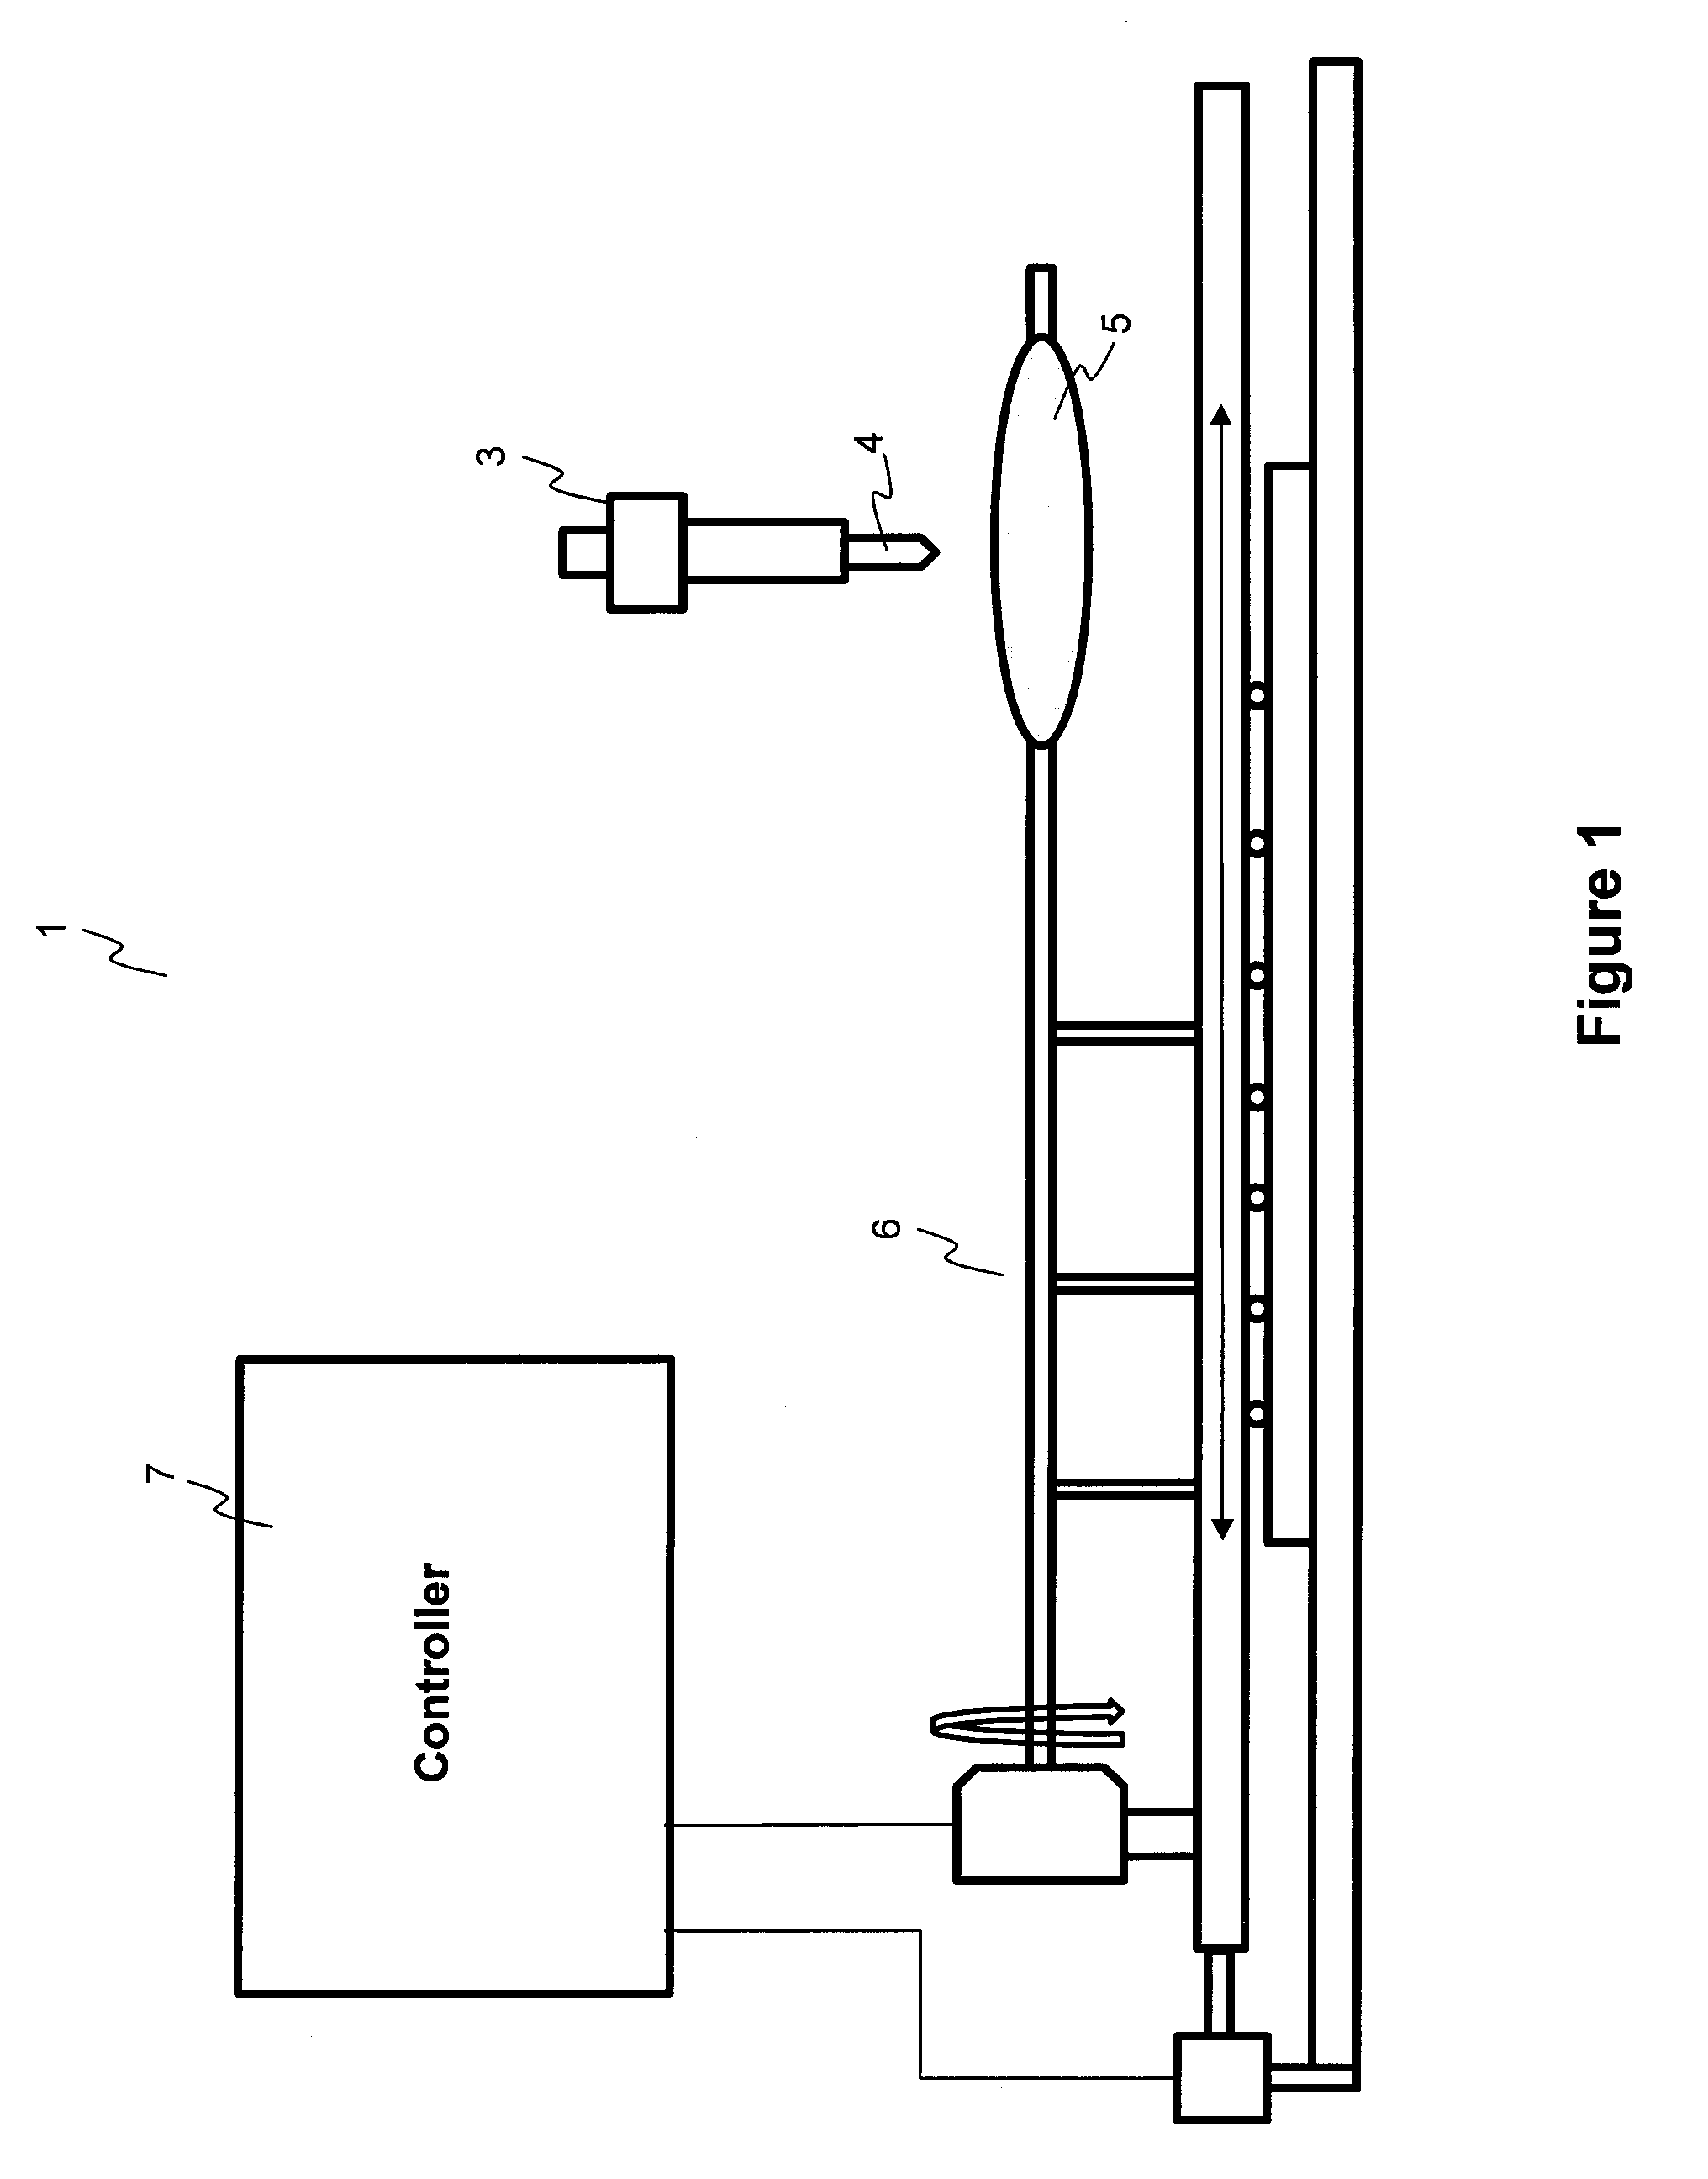 Methods and apparatuses for coating balloon catheters